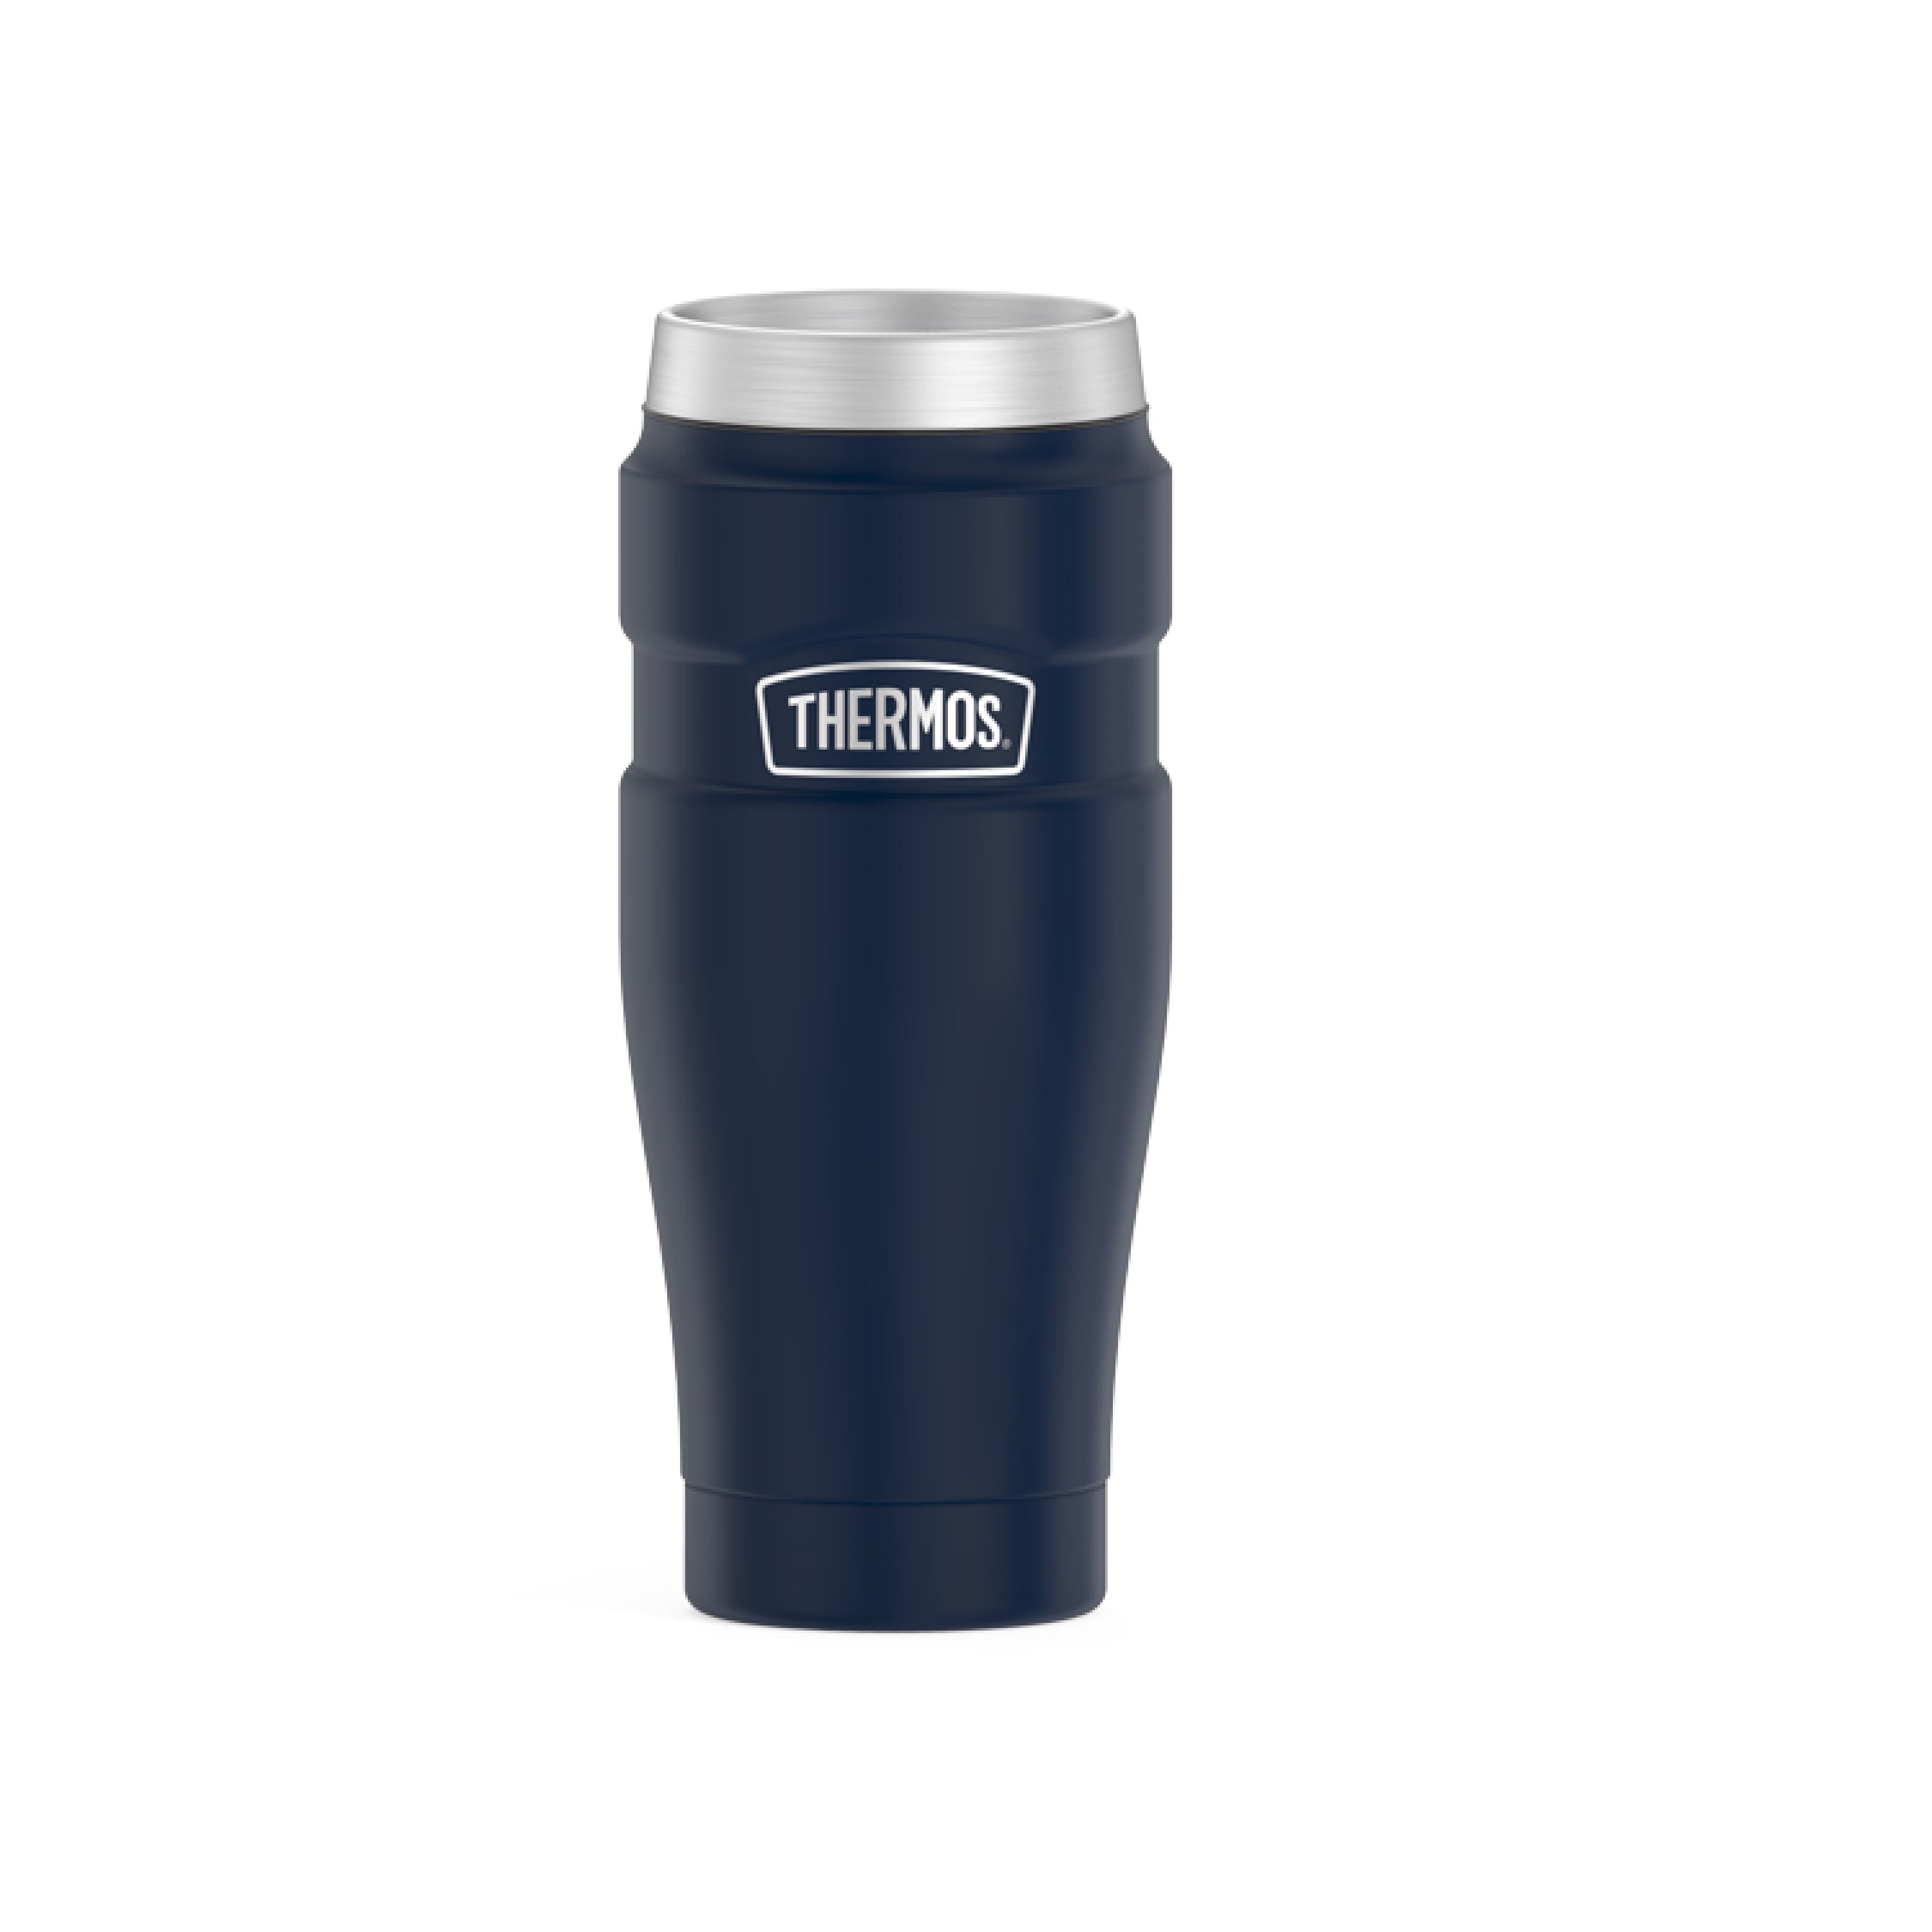 Details about   Thermos 16 oz Insulated Choose Color Stainless Steel King Travel Mug Tumbler 